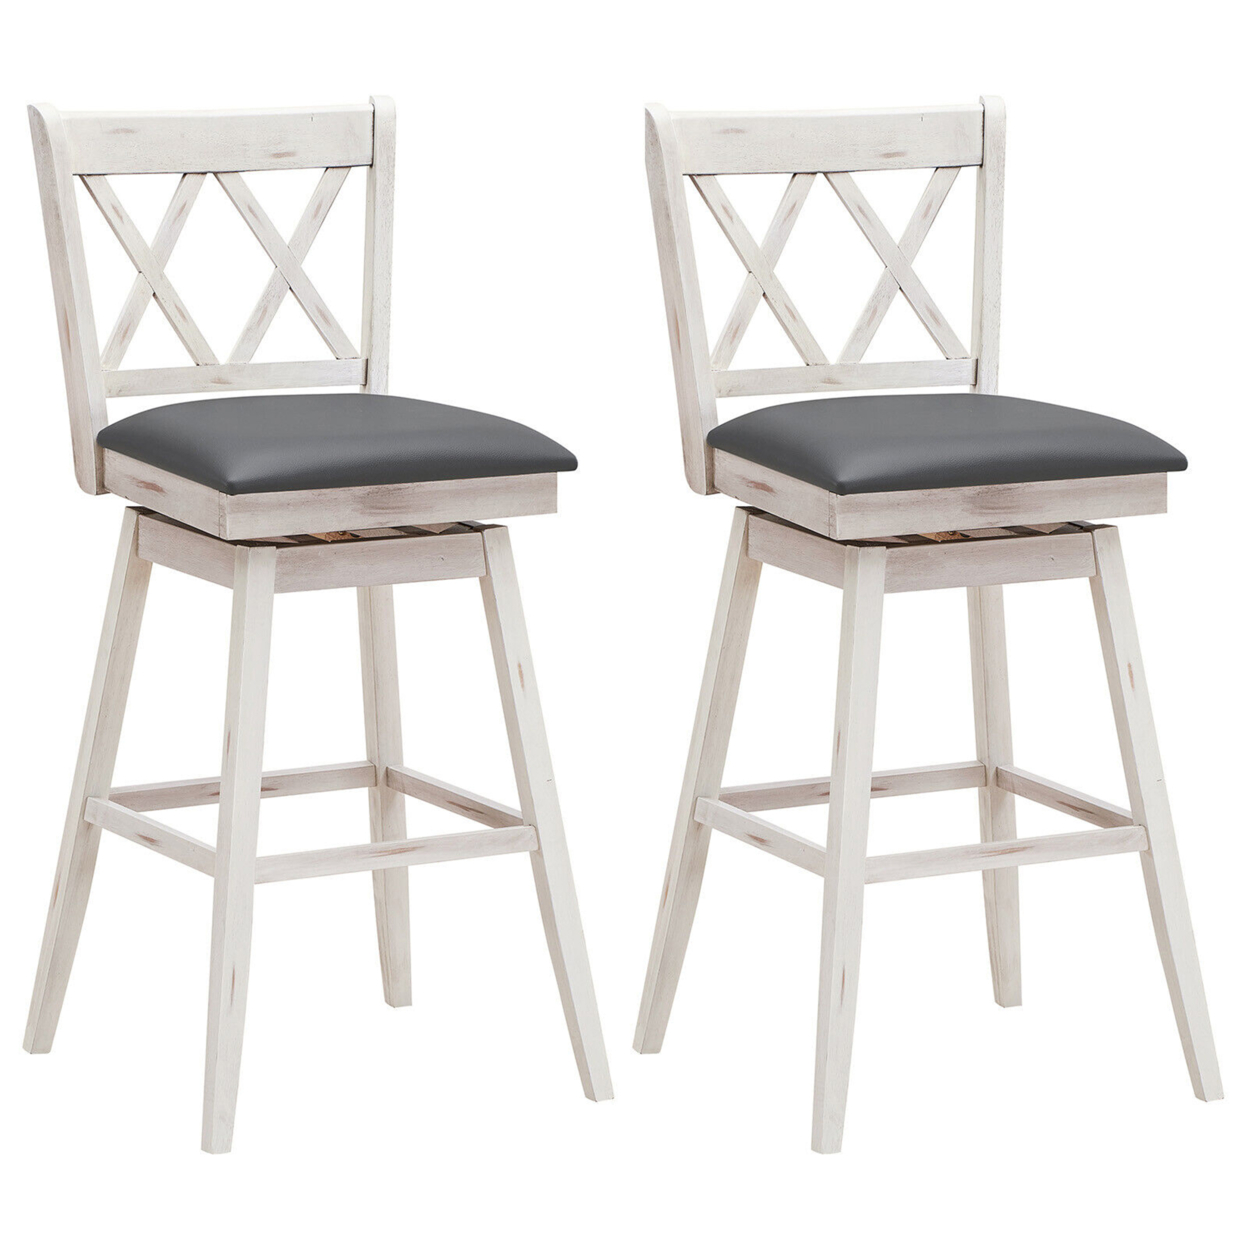 Set Of 2 Barstools Swivel Bar Height Chairs With Rubber Wood Legs - Antique White